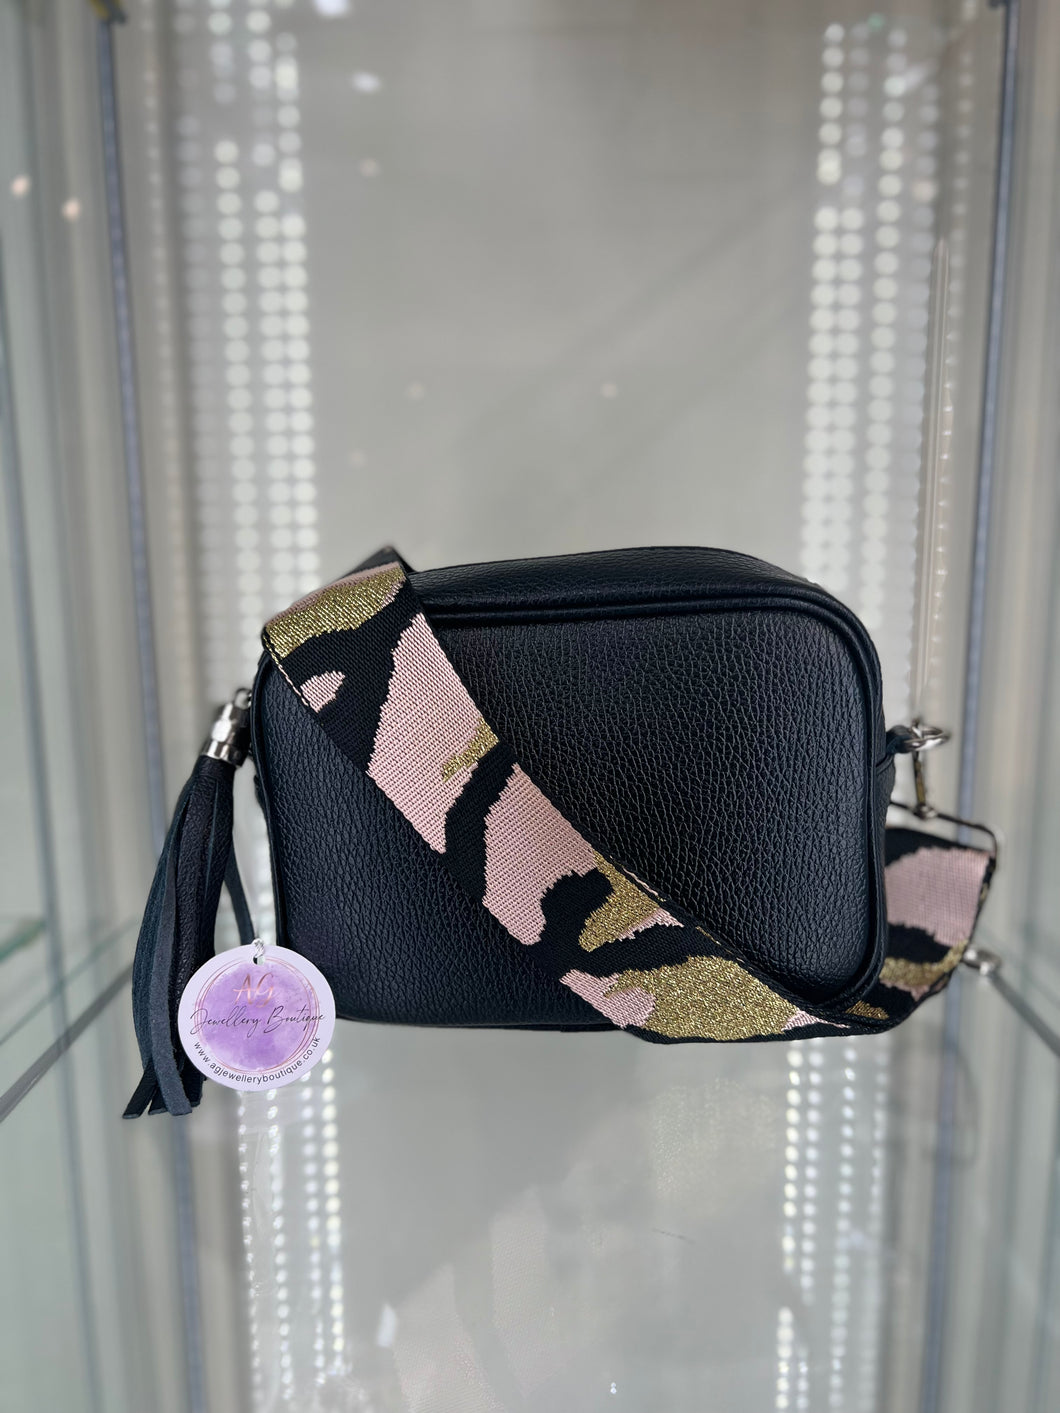 Real leather Black crossbody bag with Camo Pink/Black Gold  strap